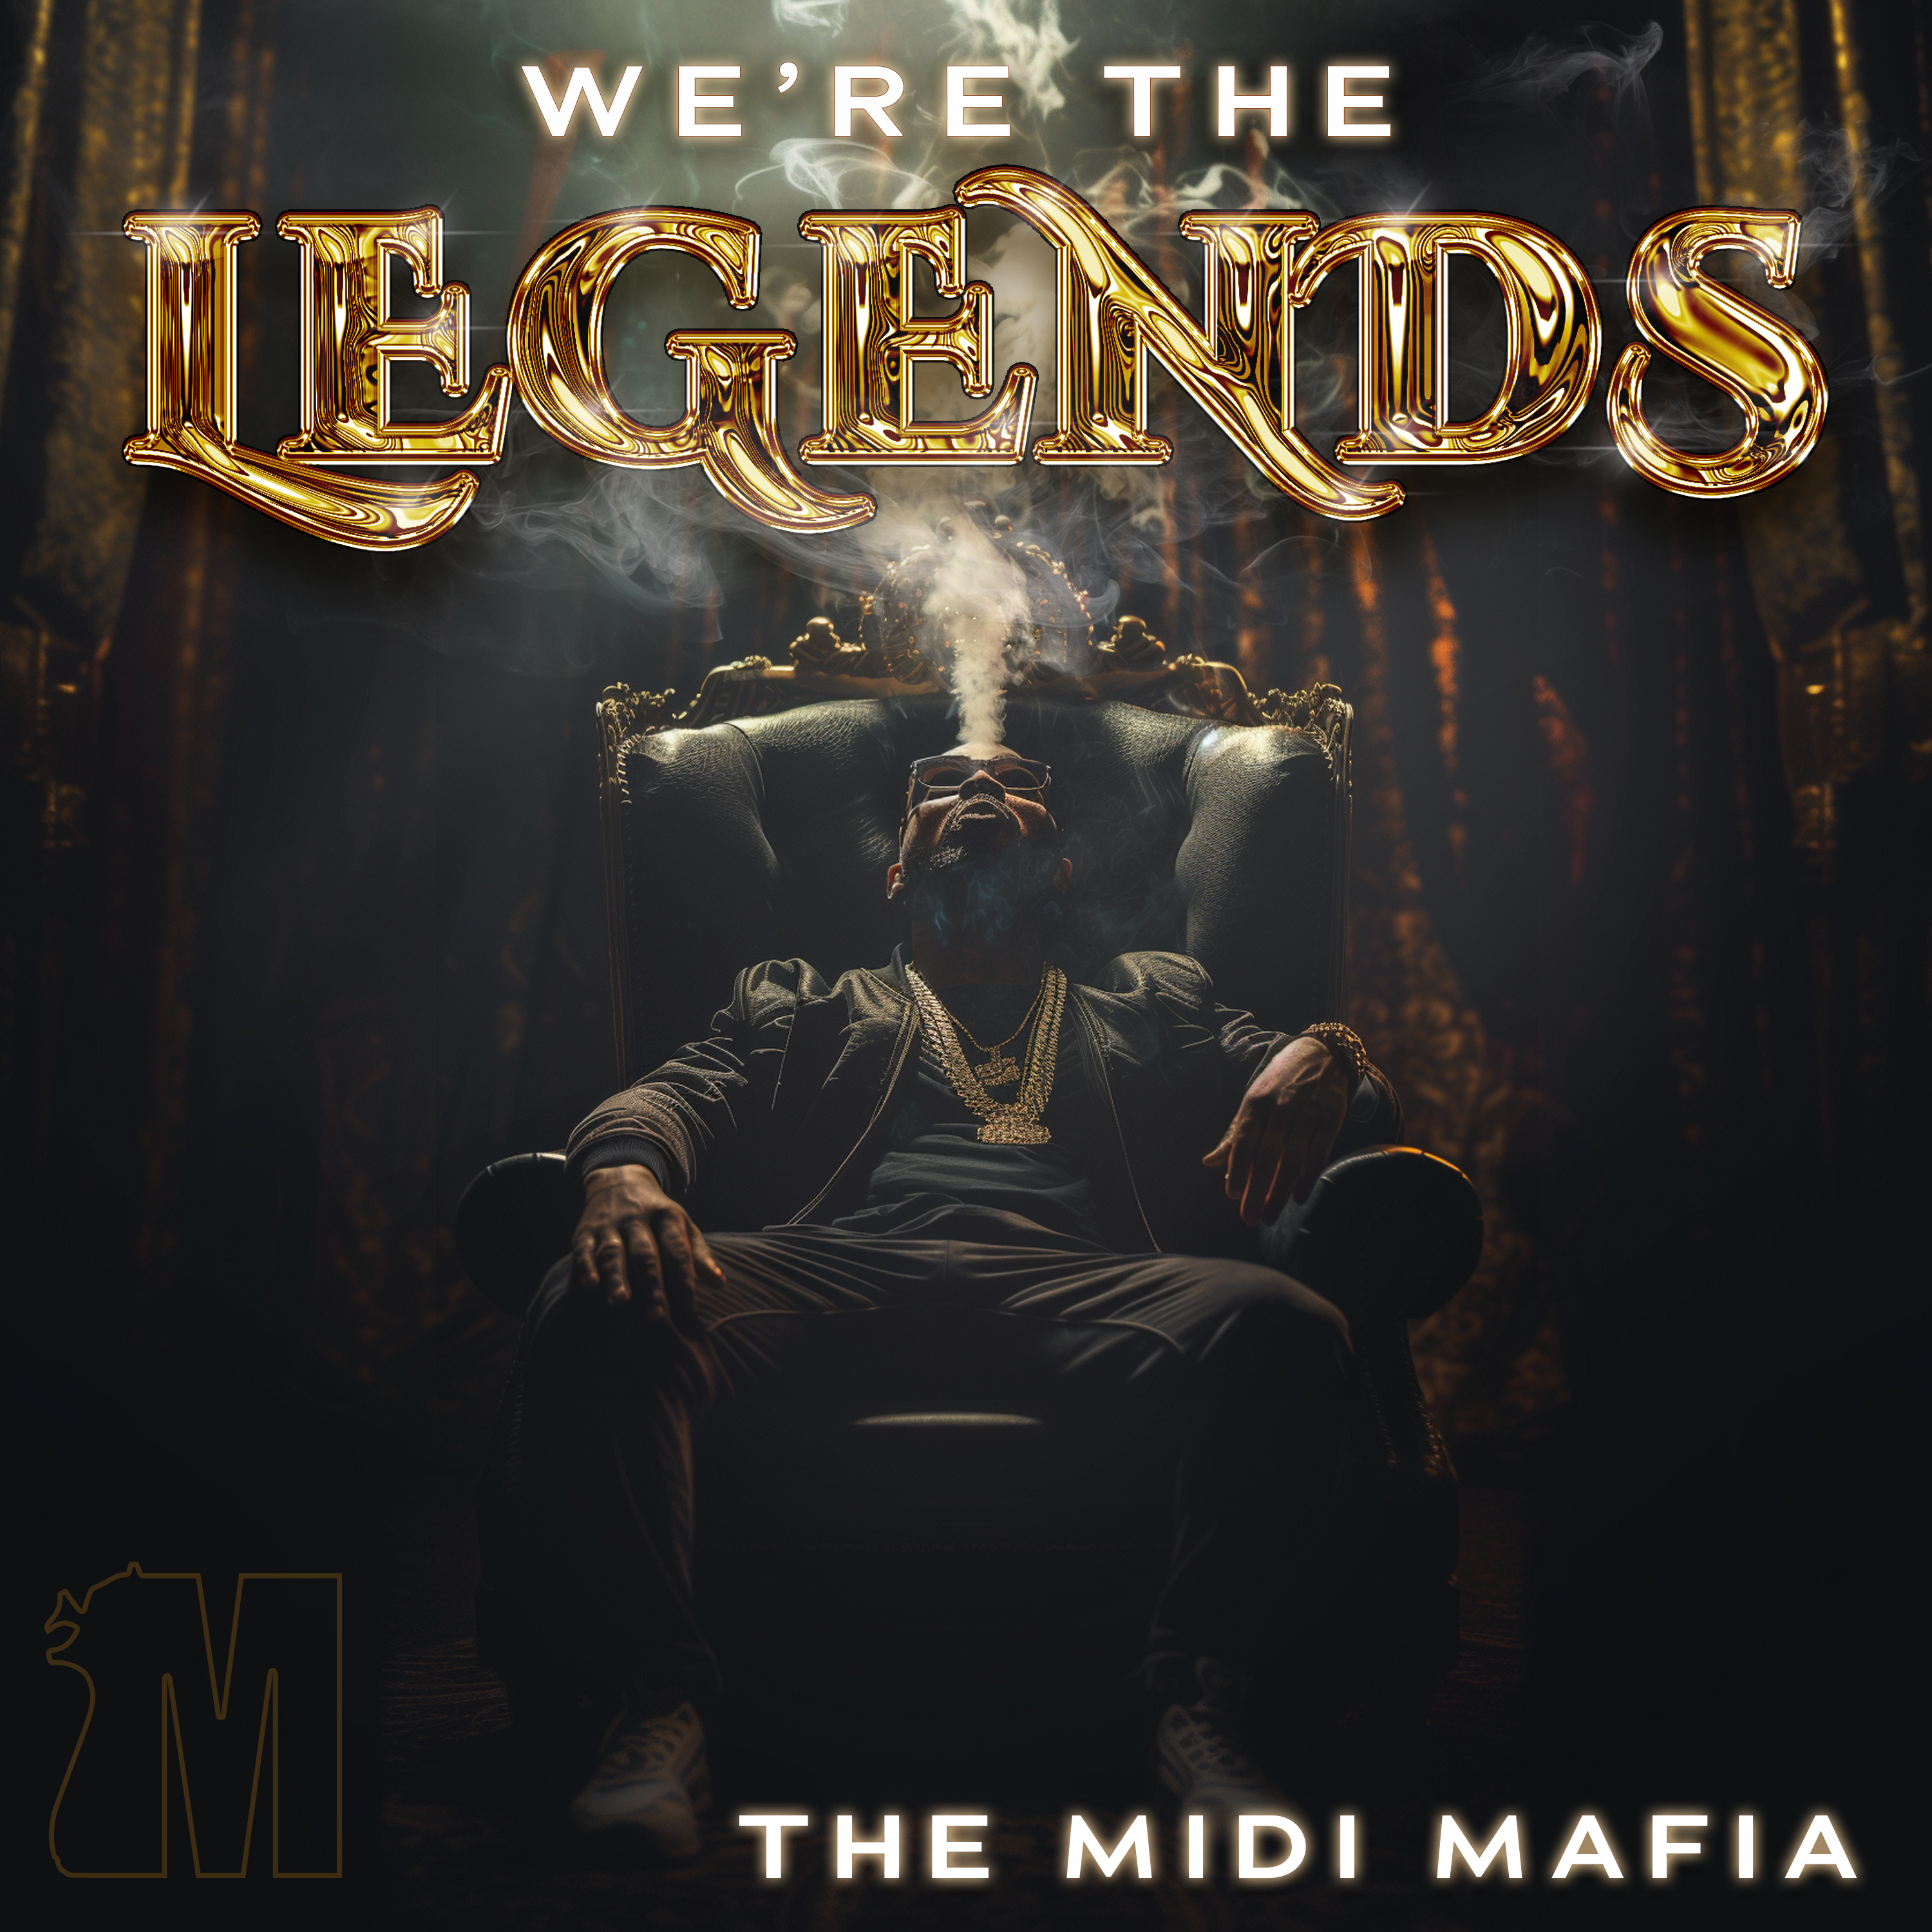 AETN WE'RE THE LEGENDS (FT. THE MIDI MAFIA, CHEL STRONG, MAXTON WALLER)